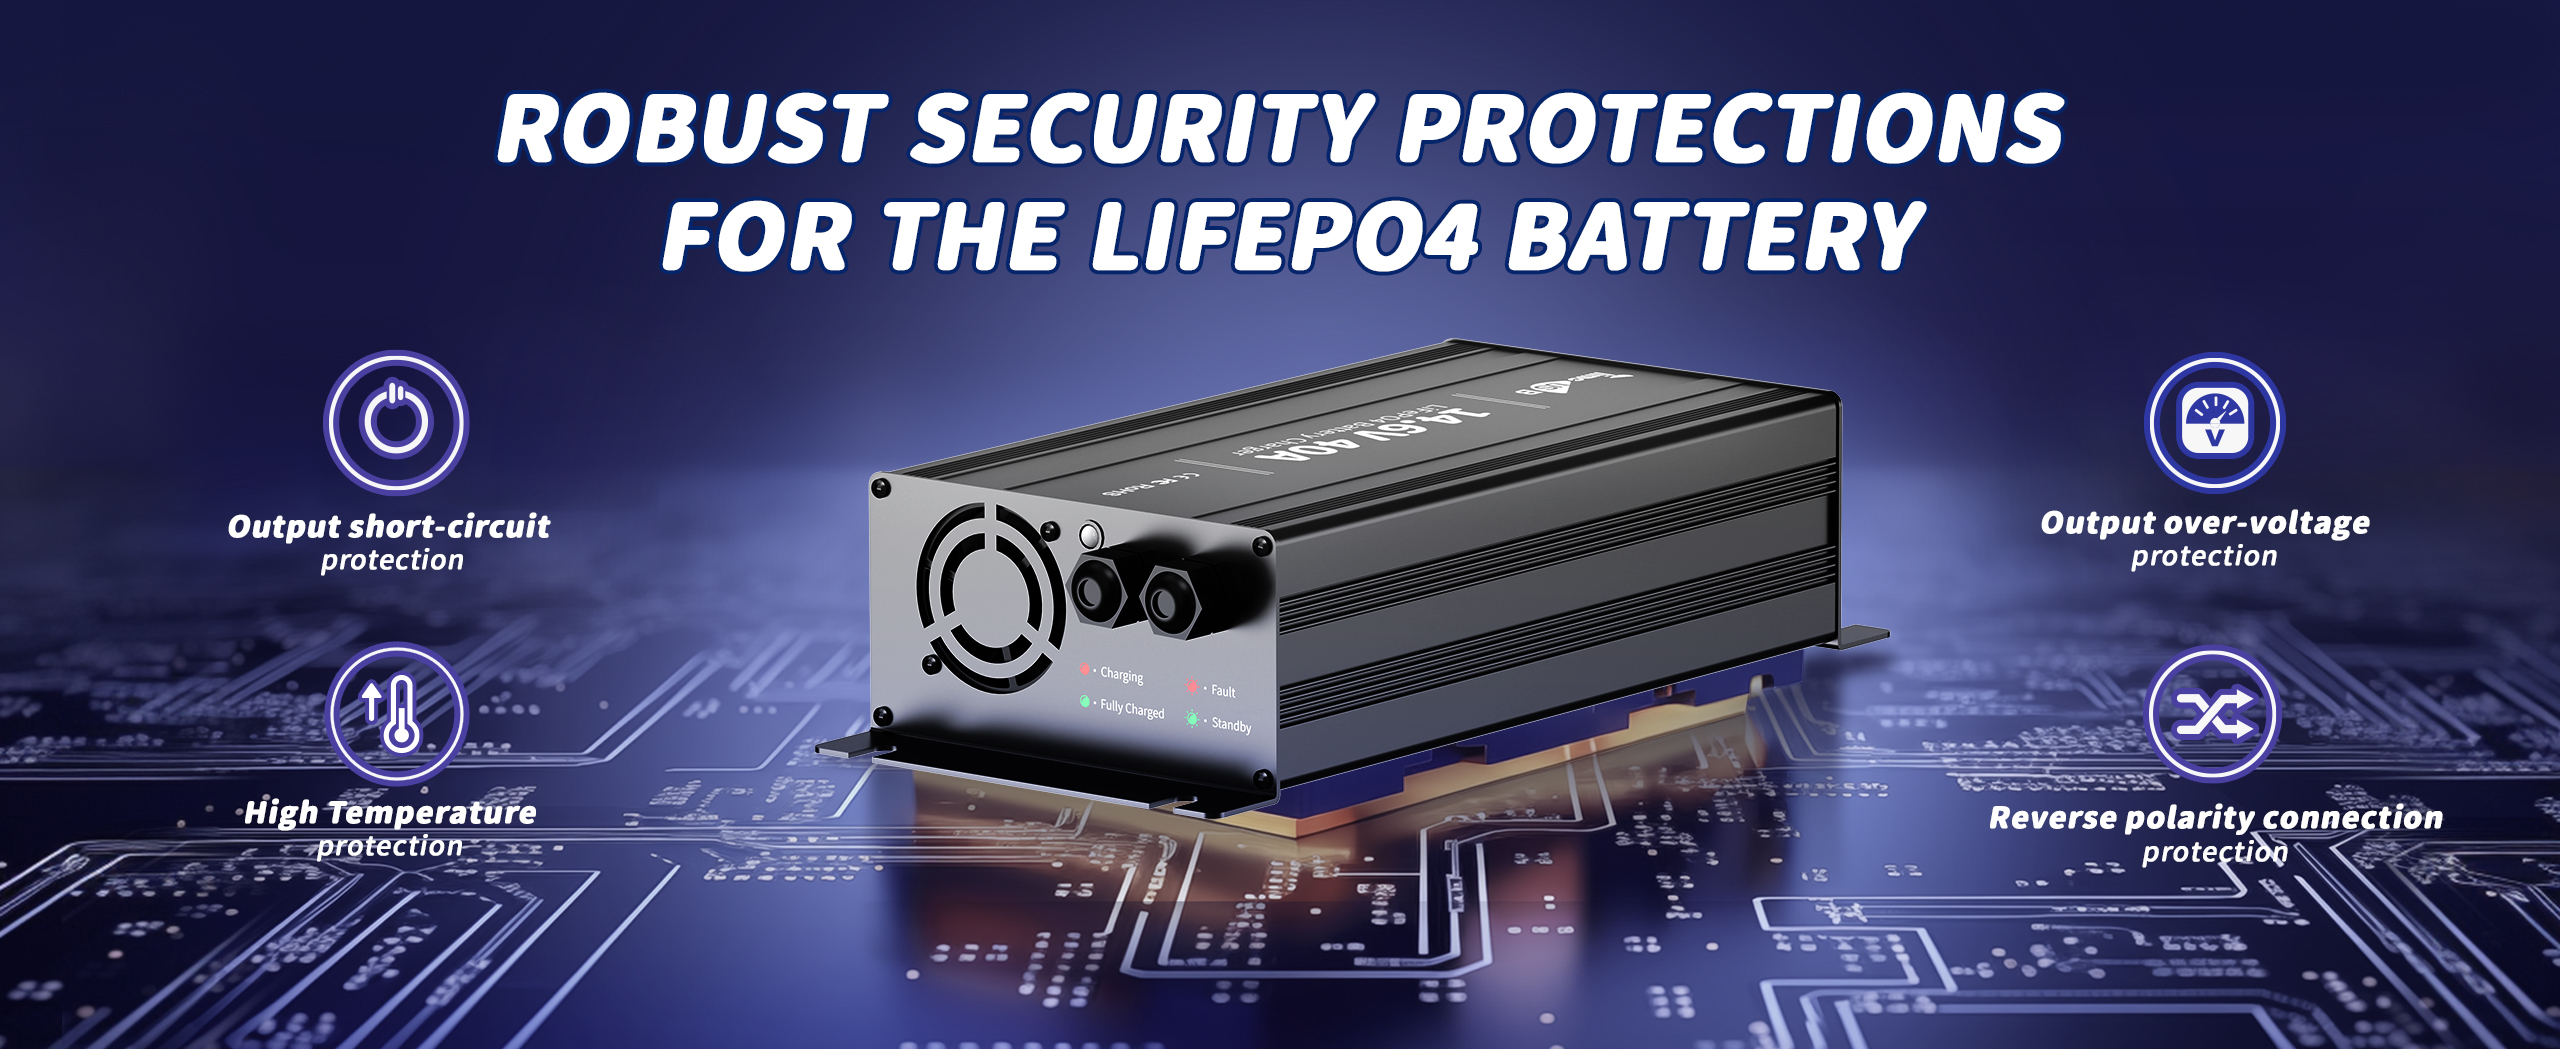 Robust security protection for the lifepo4 battery, lifepo4 battery charger